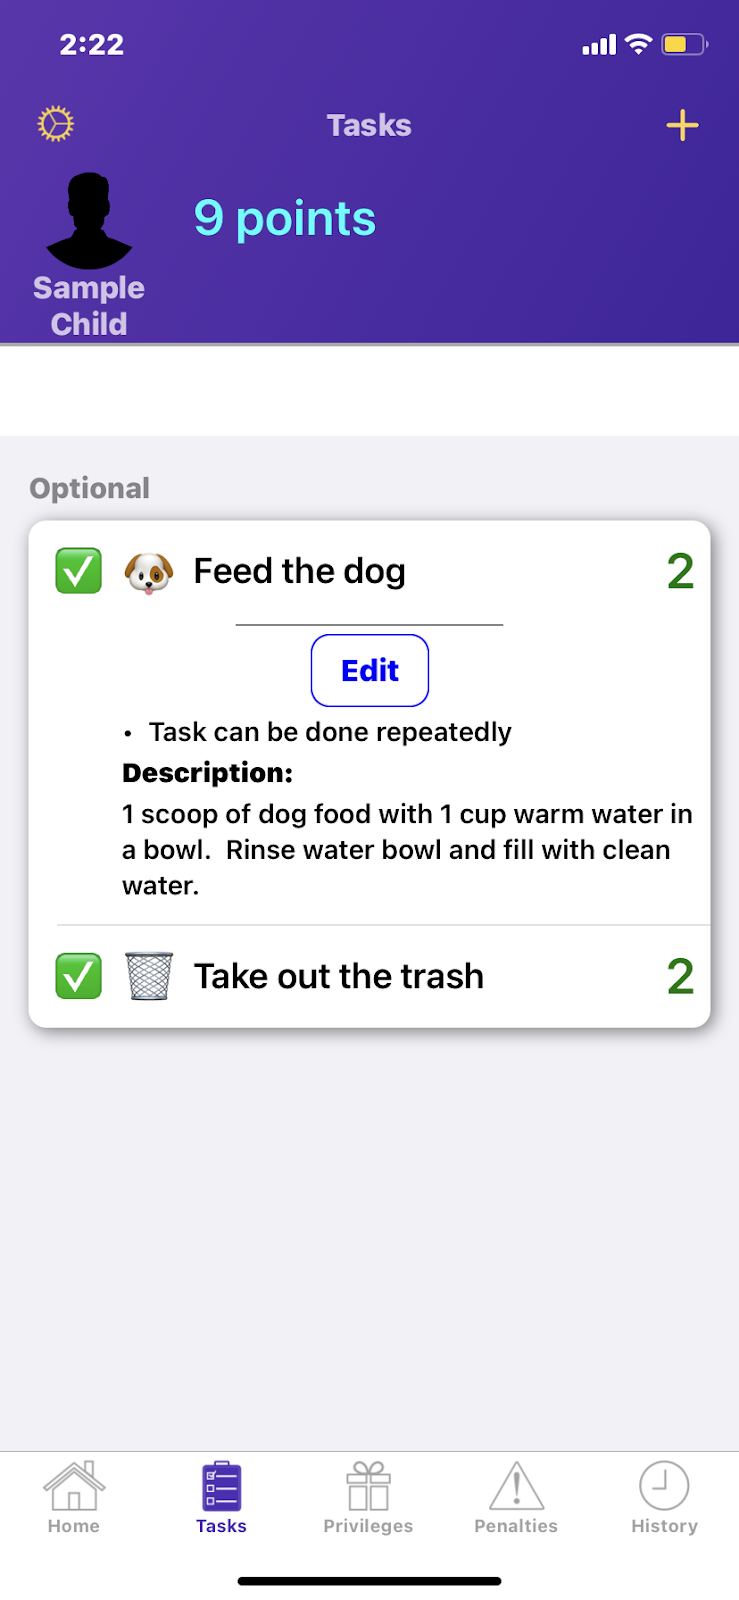 The Privilege Points Chore assigning app shows a chore reminder with specific instructions.